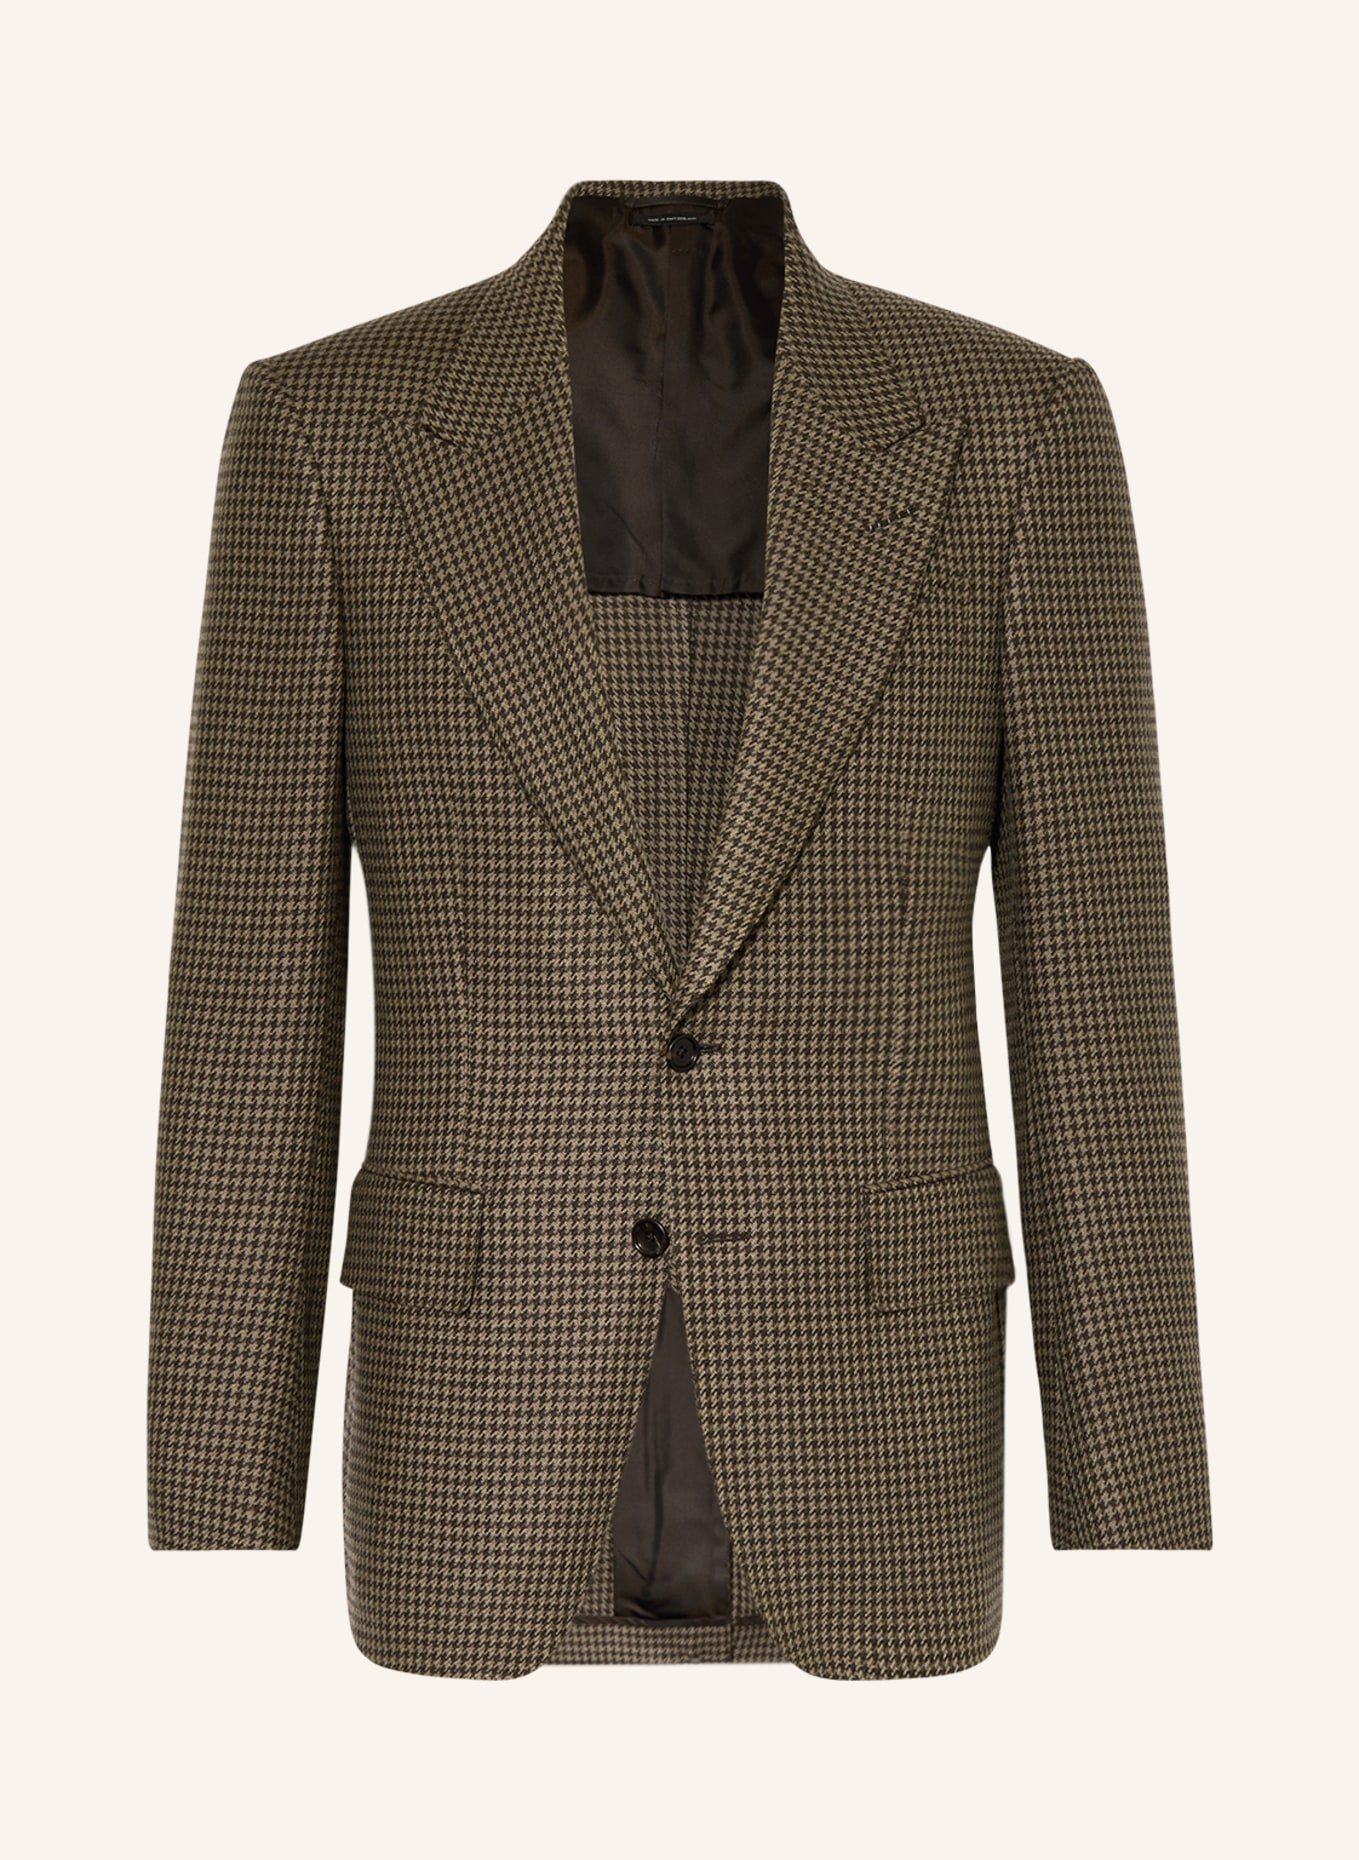 TOM FORD Suit jacket SHELTON extra slim fit with mohair, Color: BROWN/ DARK BROWN/ LIGHT BROWN (Image 1)